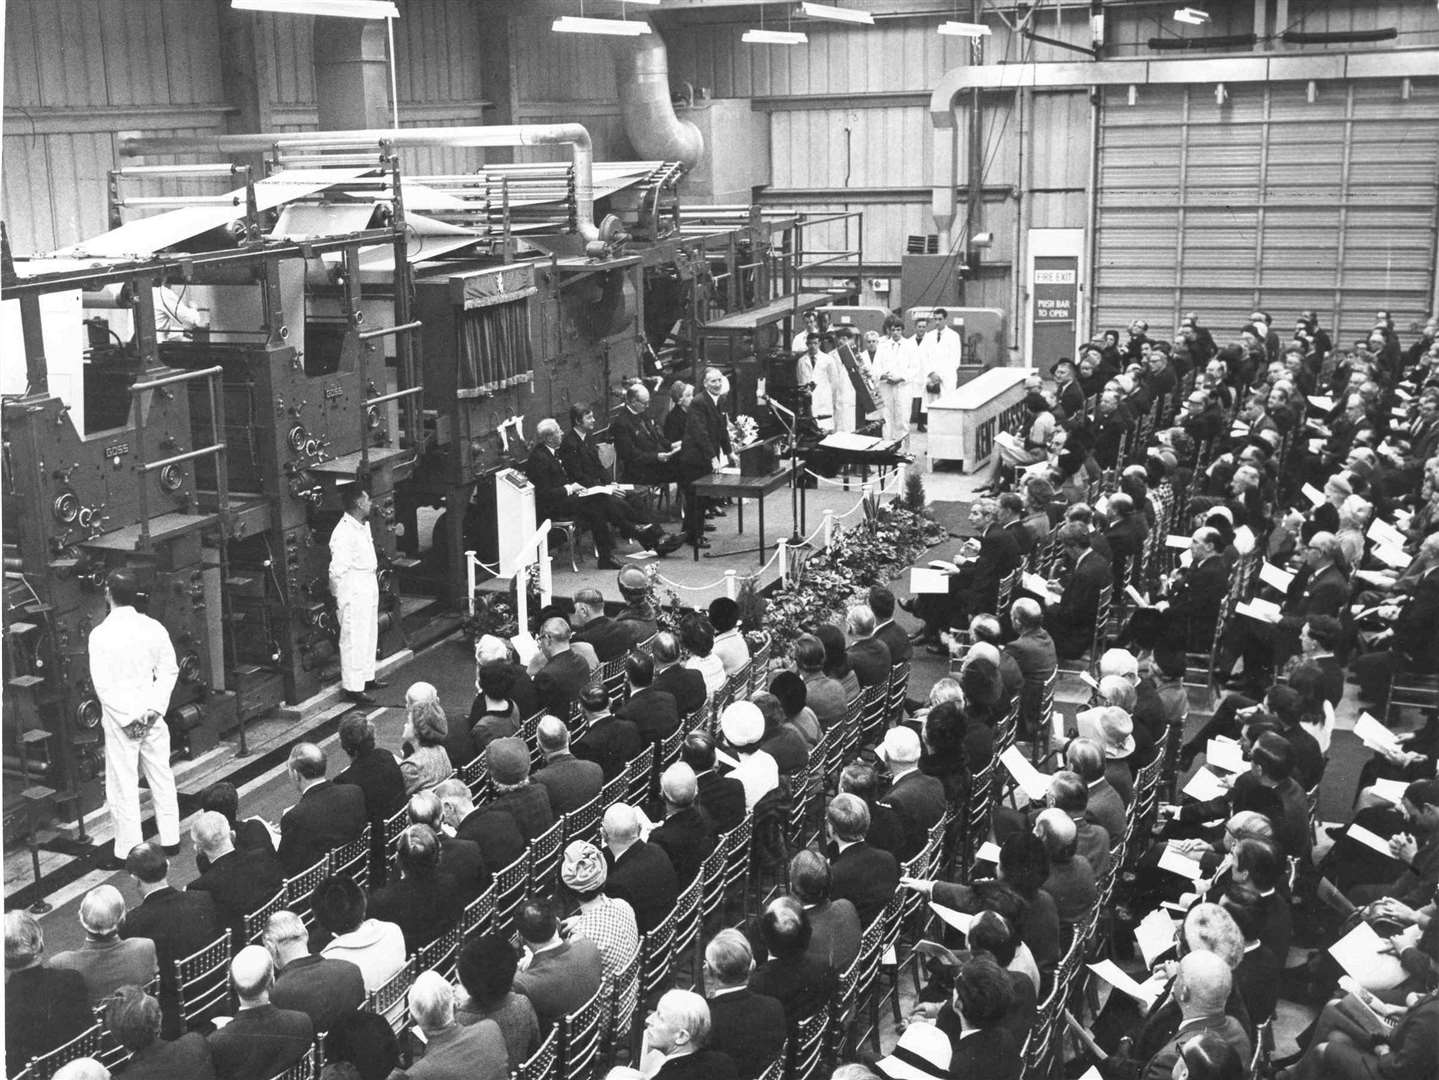 Opening ceremony of the KM press at Larkfield by The Rt Hon Edward Heath in January 1970, with Mr H R P Boorman and Edwin Boorman looking on